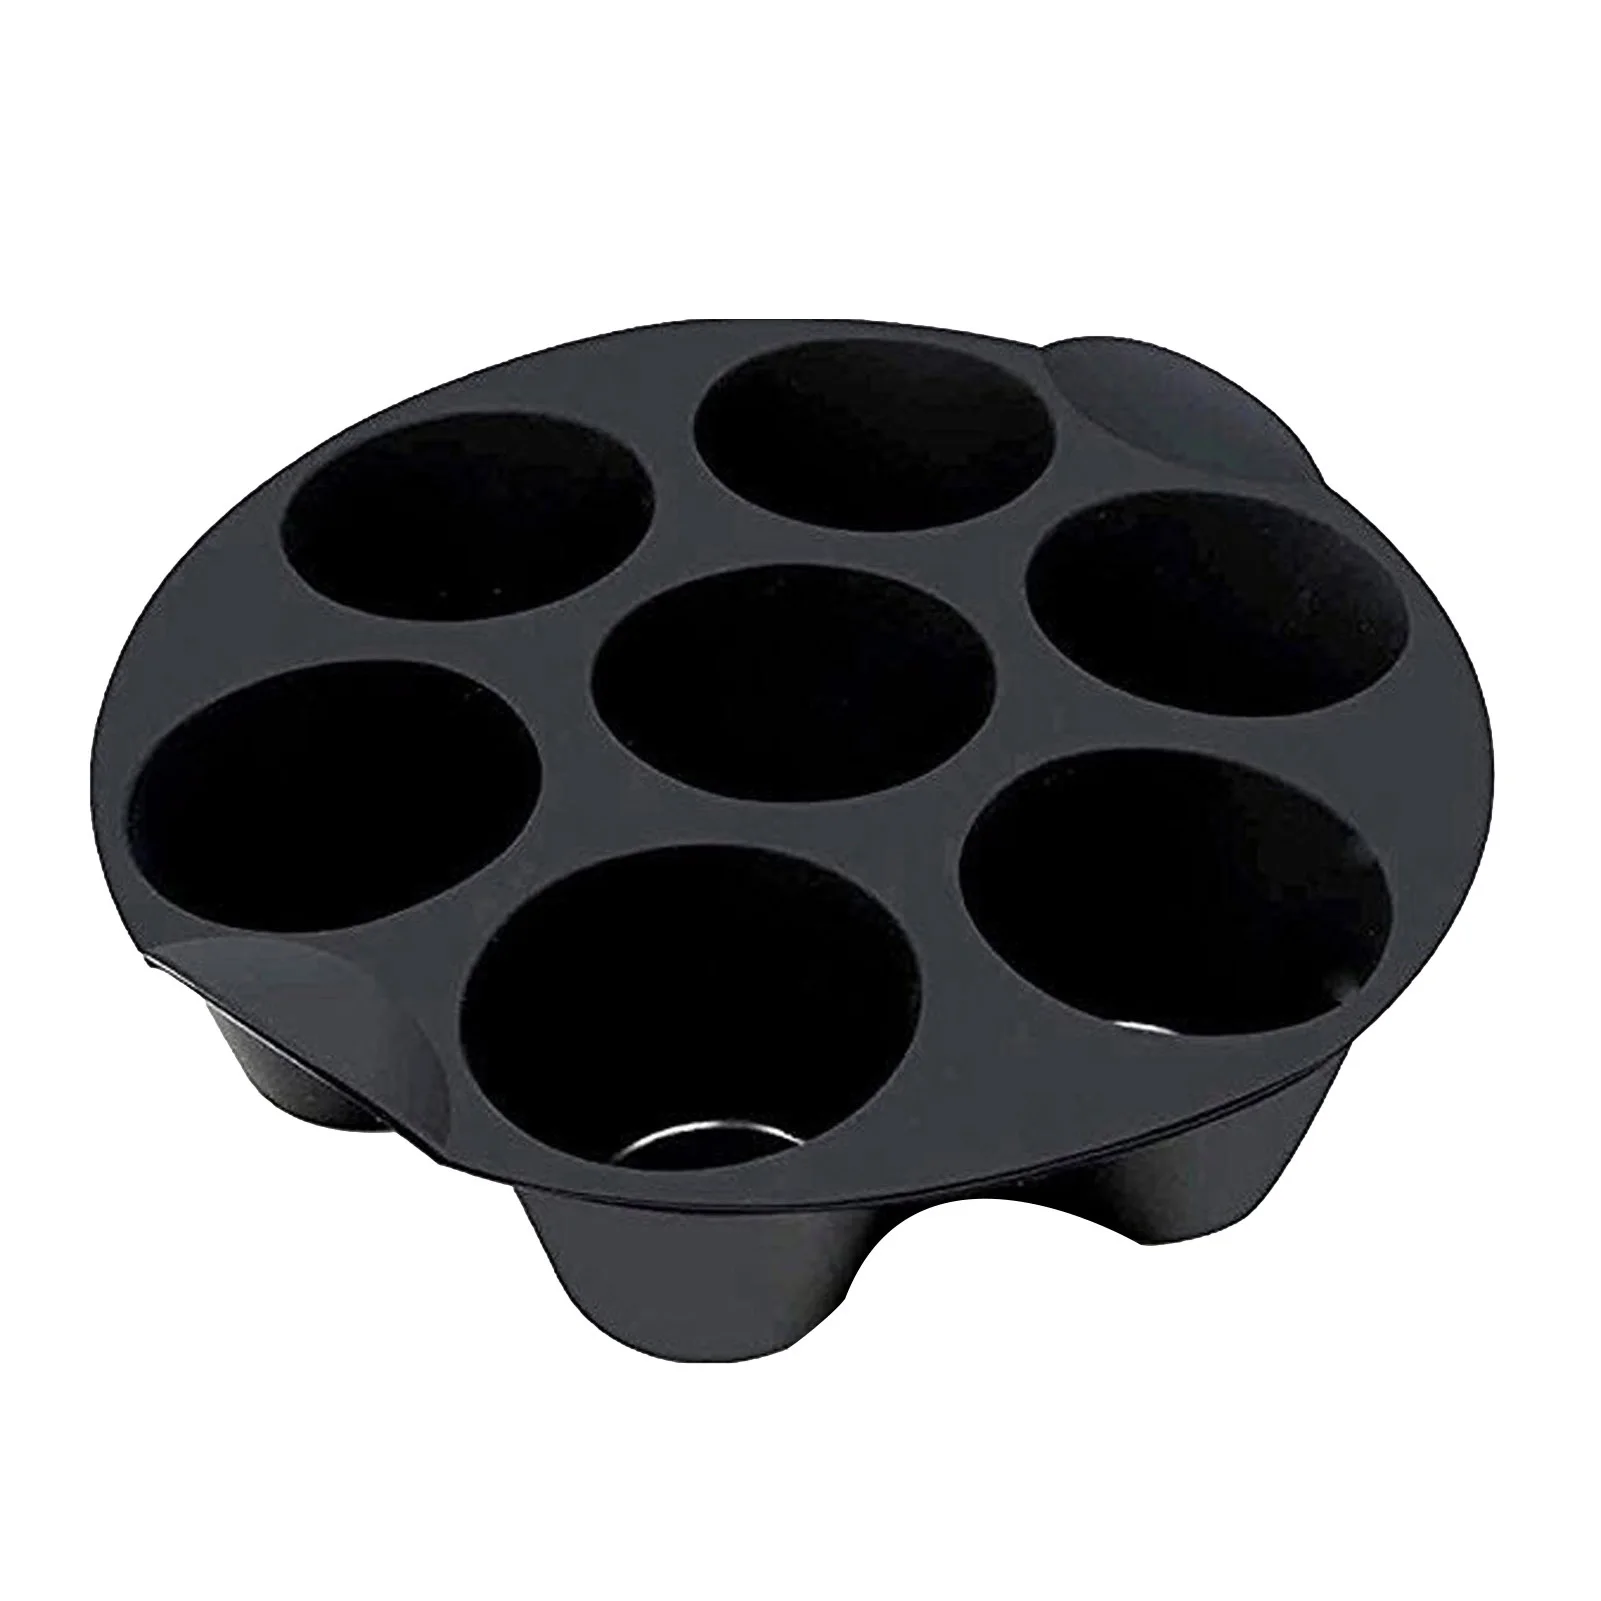 

Air Fryer Accessories 7 Even Cake Cup Muffin Cup For 3.5-5.8L Various Air Fryer Molds Cupcake Muffin Baking Cups Nonstick Pan